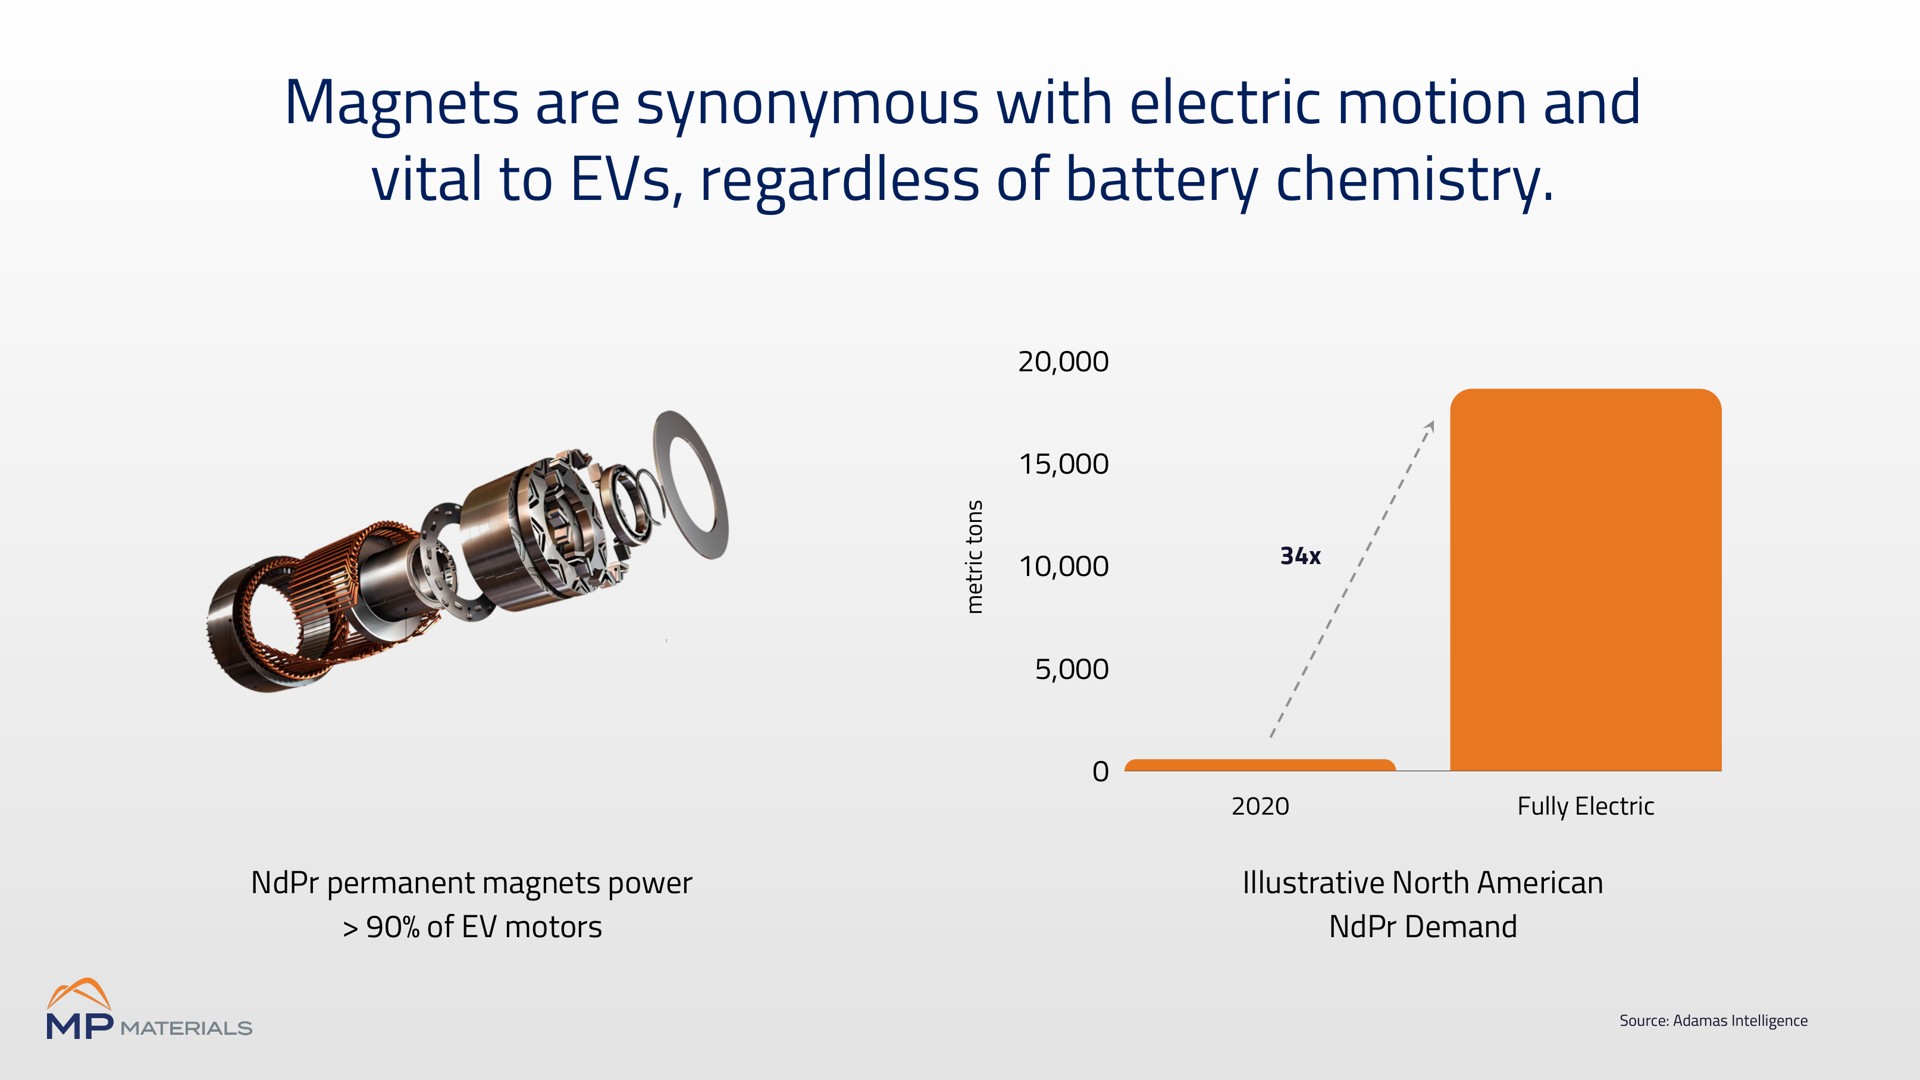 magnets are synonymous with electric motion and vital to regardless of battery chemistry | MP Materials